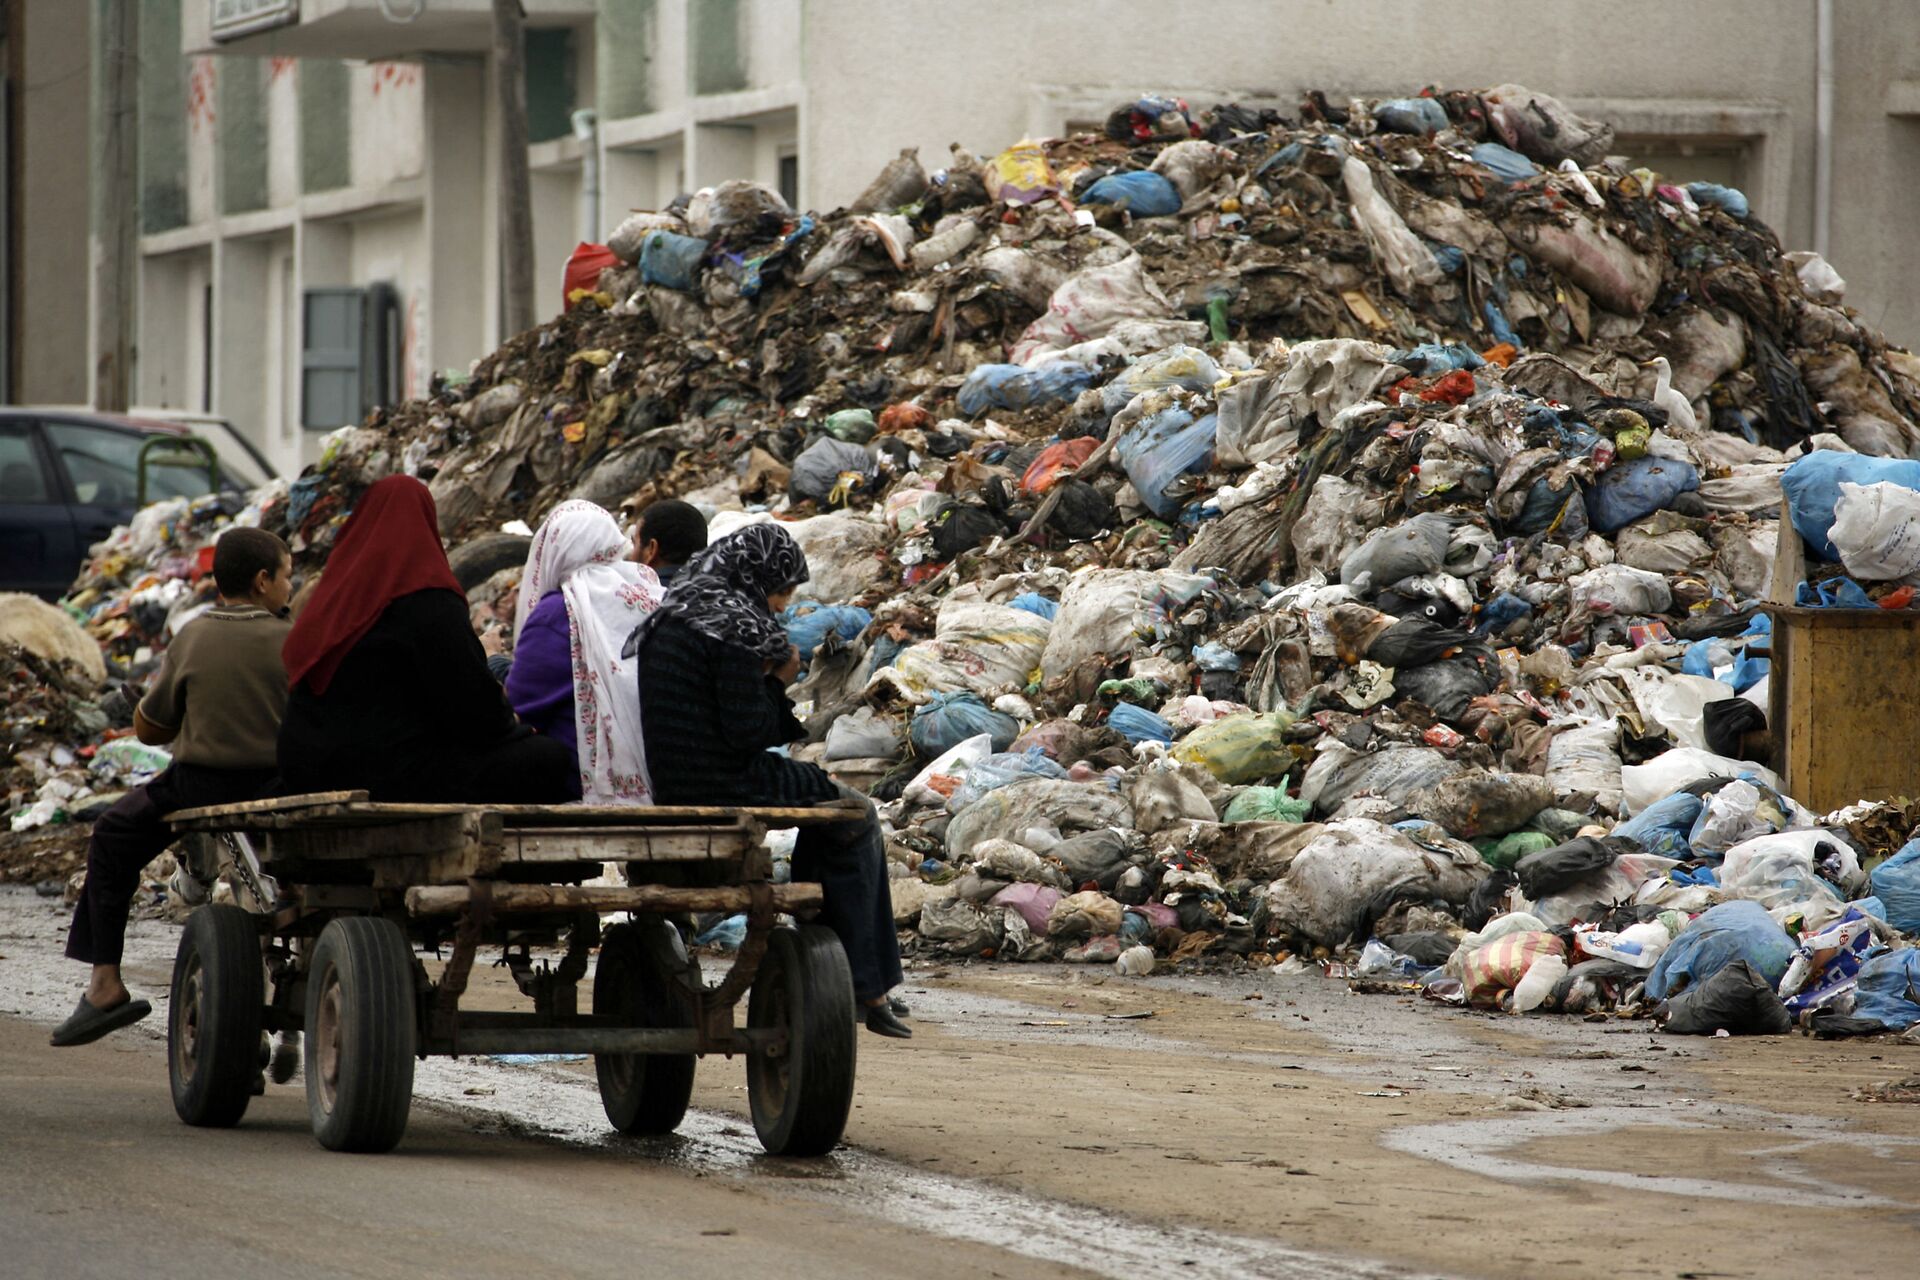 Plastic Waste Problem Getting Out of Hand in Gaza, And It Won't Vanish Anytime Soon - Here's Why - Sputnik International, 1920, 20.06.2021